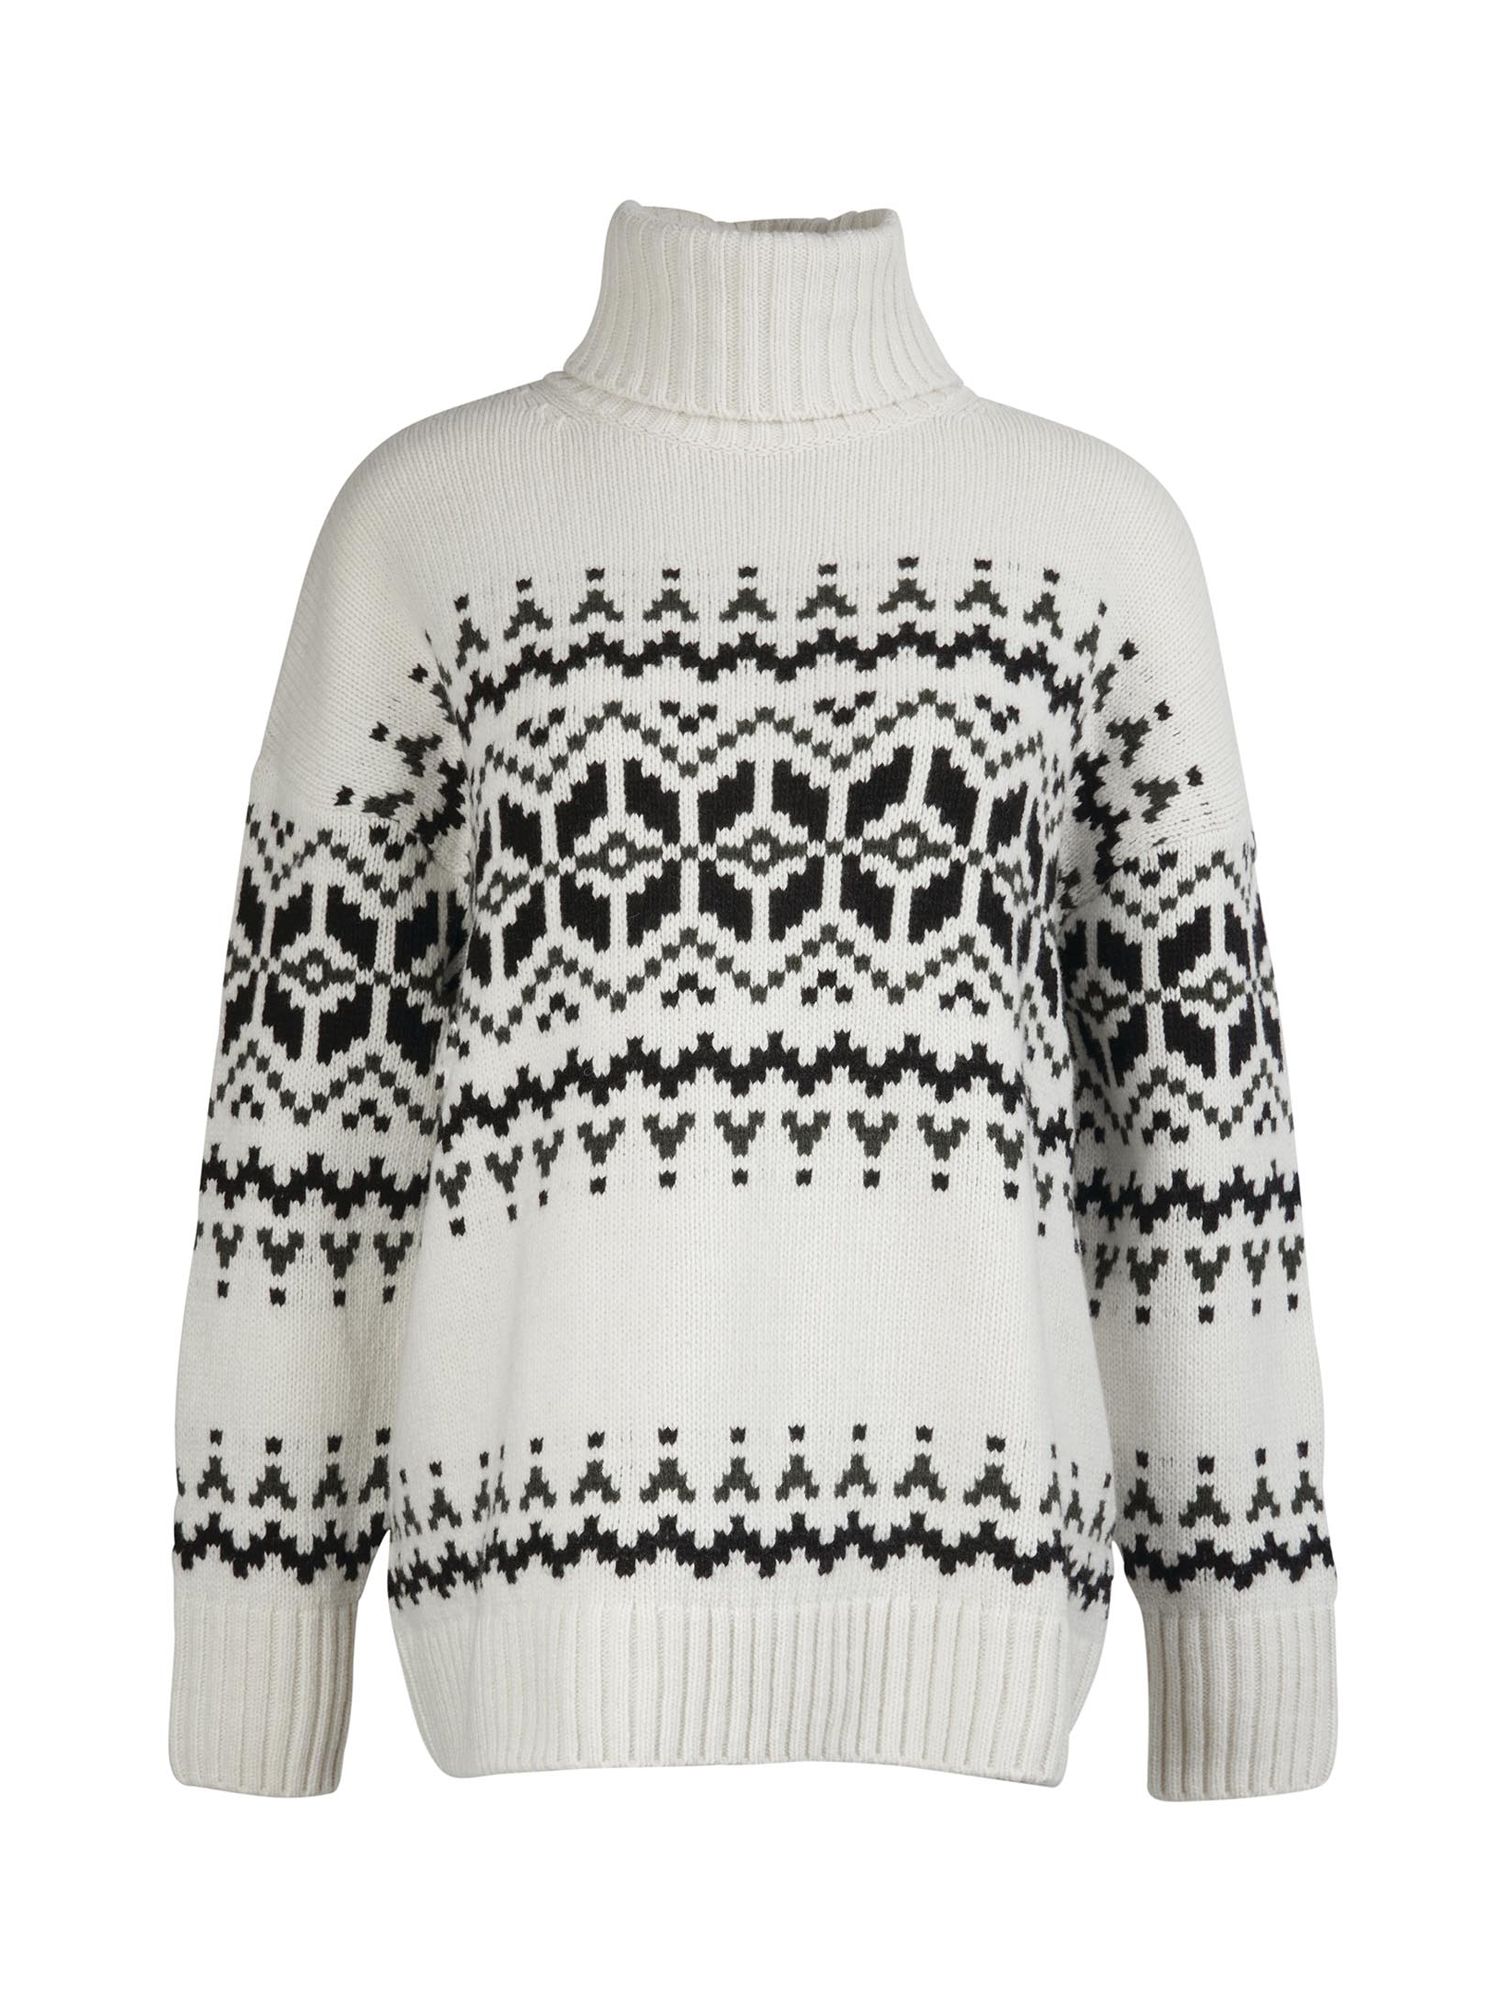 Barbour Patrisse Fair Isle Knitted Jumper, Antique White